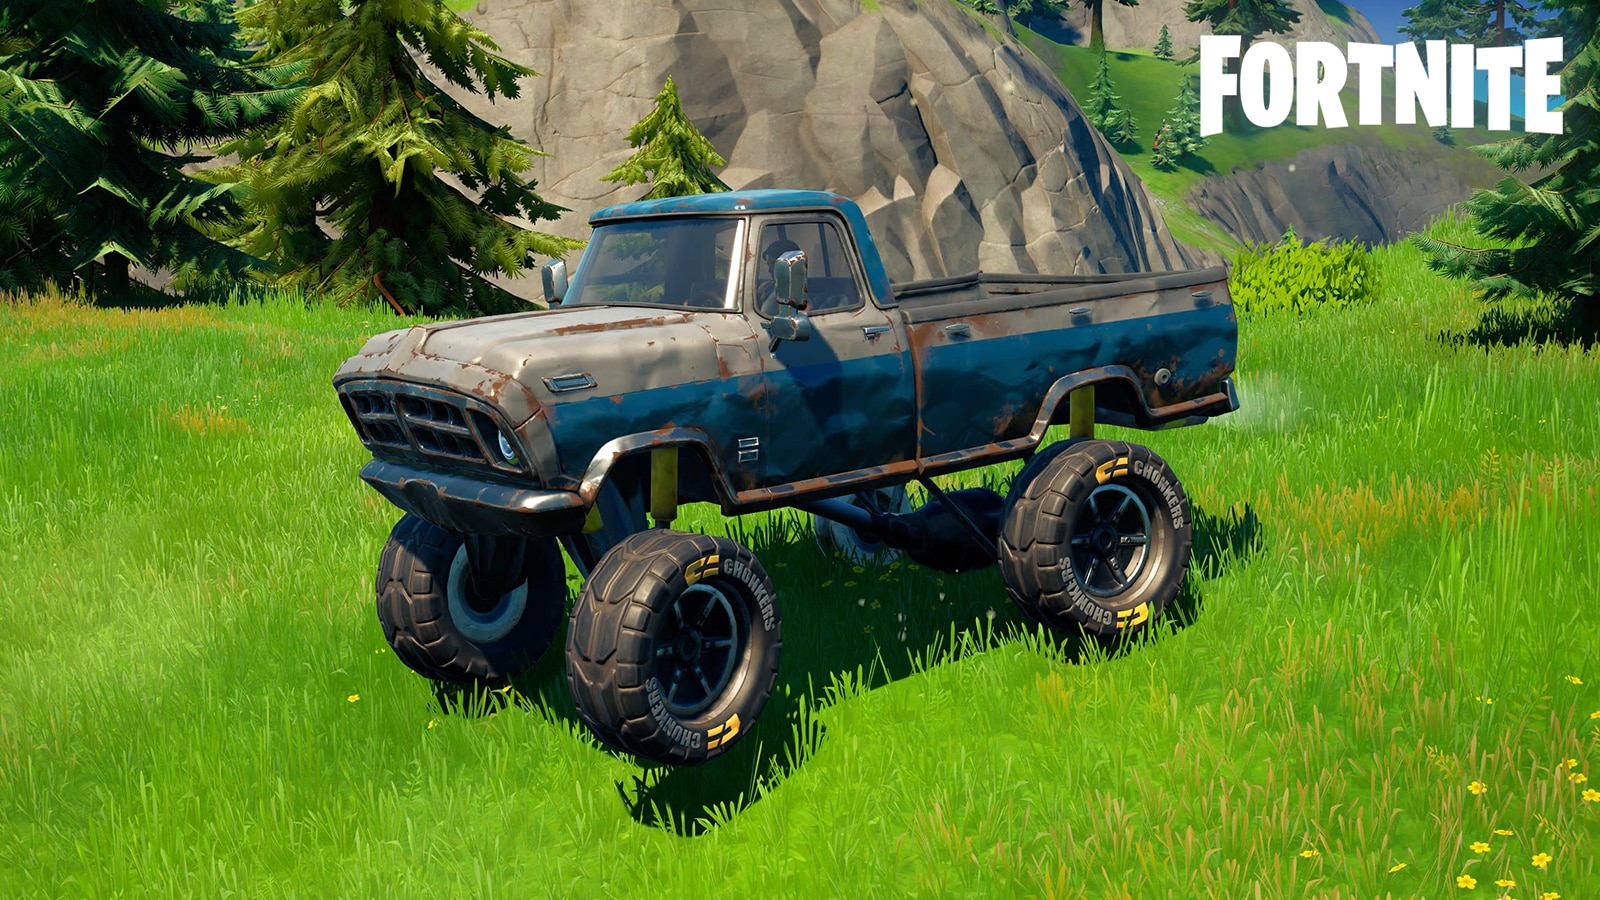 Fortnite: Where to Modify Vehicles with Off-Road Tires in Fortnite.